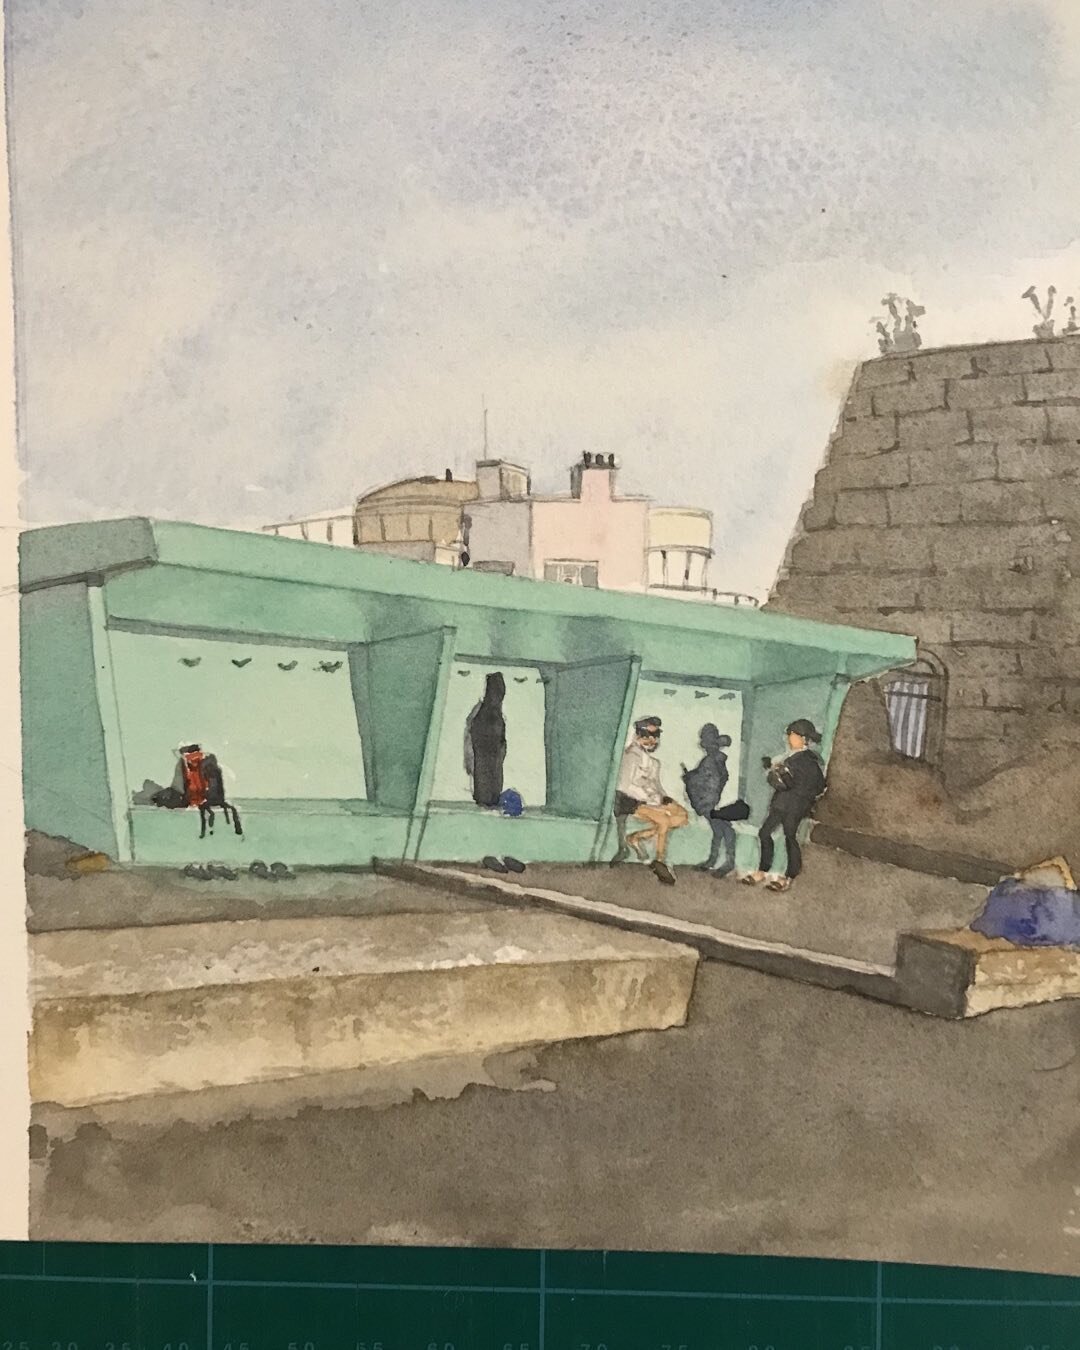 Retro vibe at the 40ft during filming
.
.
.
#watercolour
#watercolor
#watercolourpainting
#shirleygiffney 
#irishart
#watercolorpainting 
#irishartists
#irishartoninstagram
#sandycove